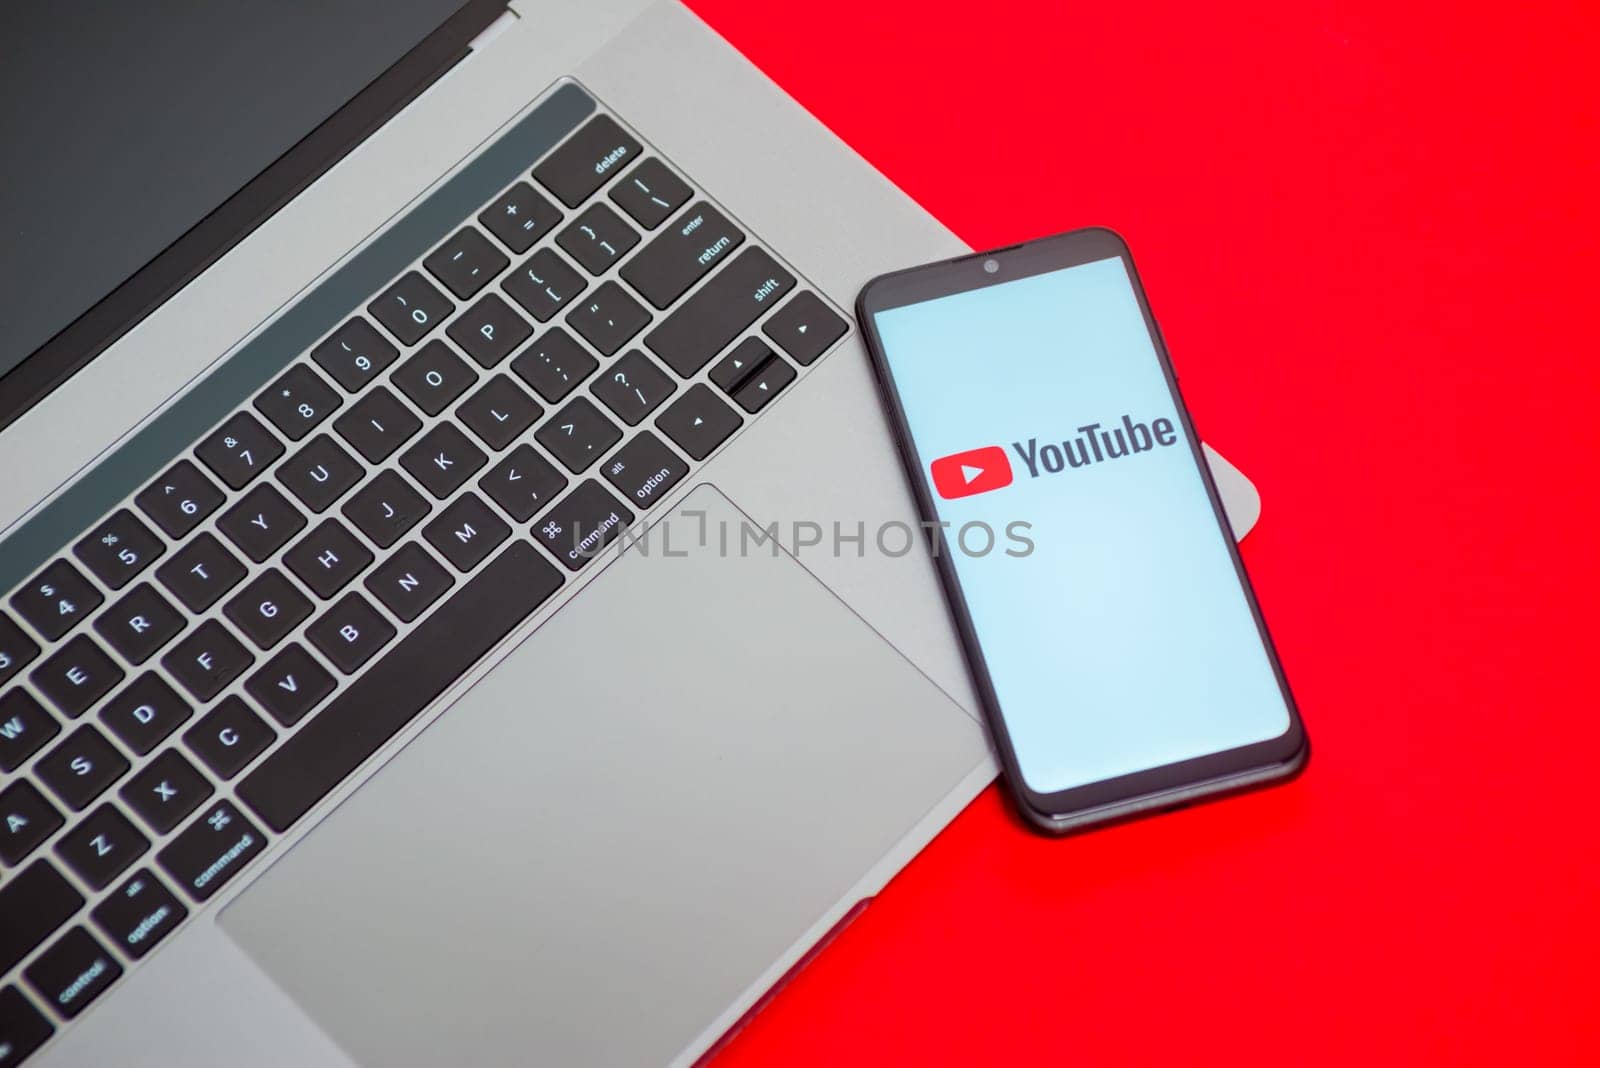 Tula, Russia - May 18,2020: Modern Smartphone with Youtube logo on the screen by zartarn